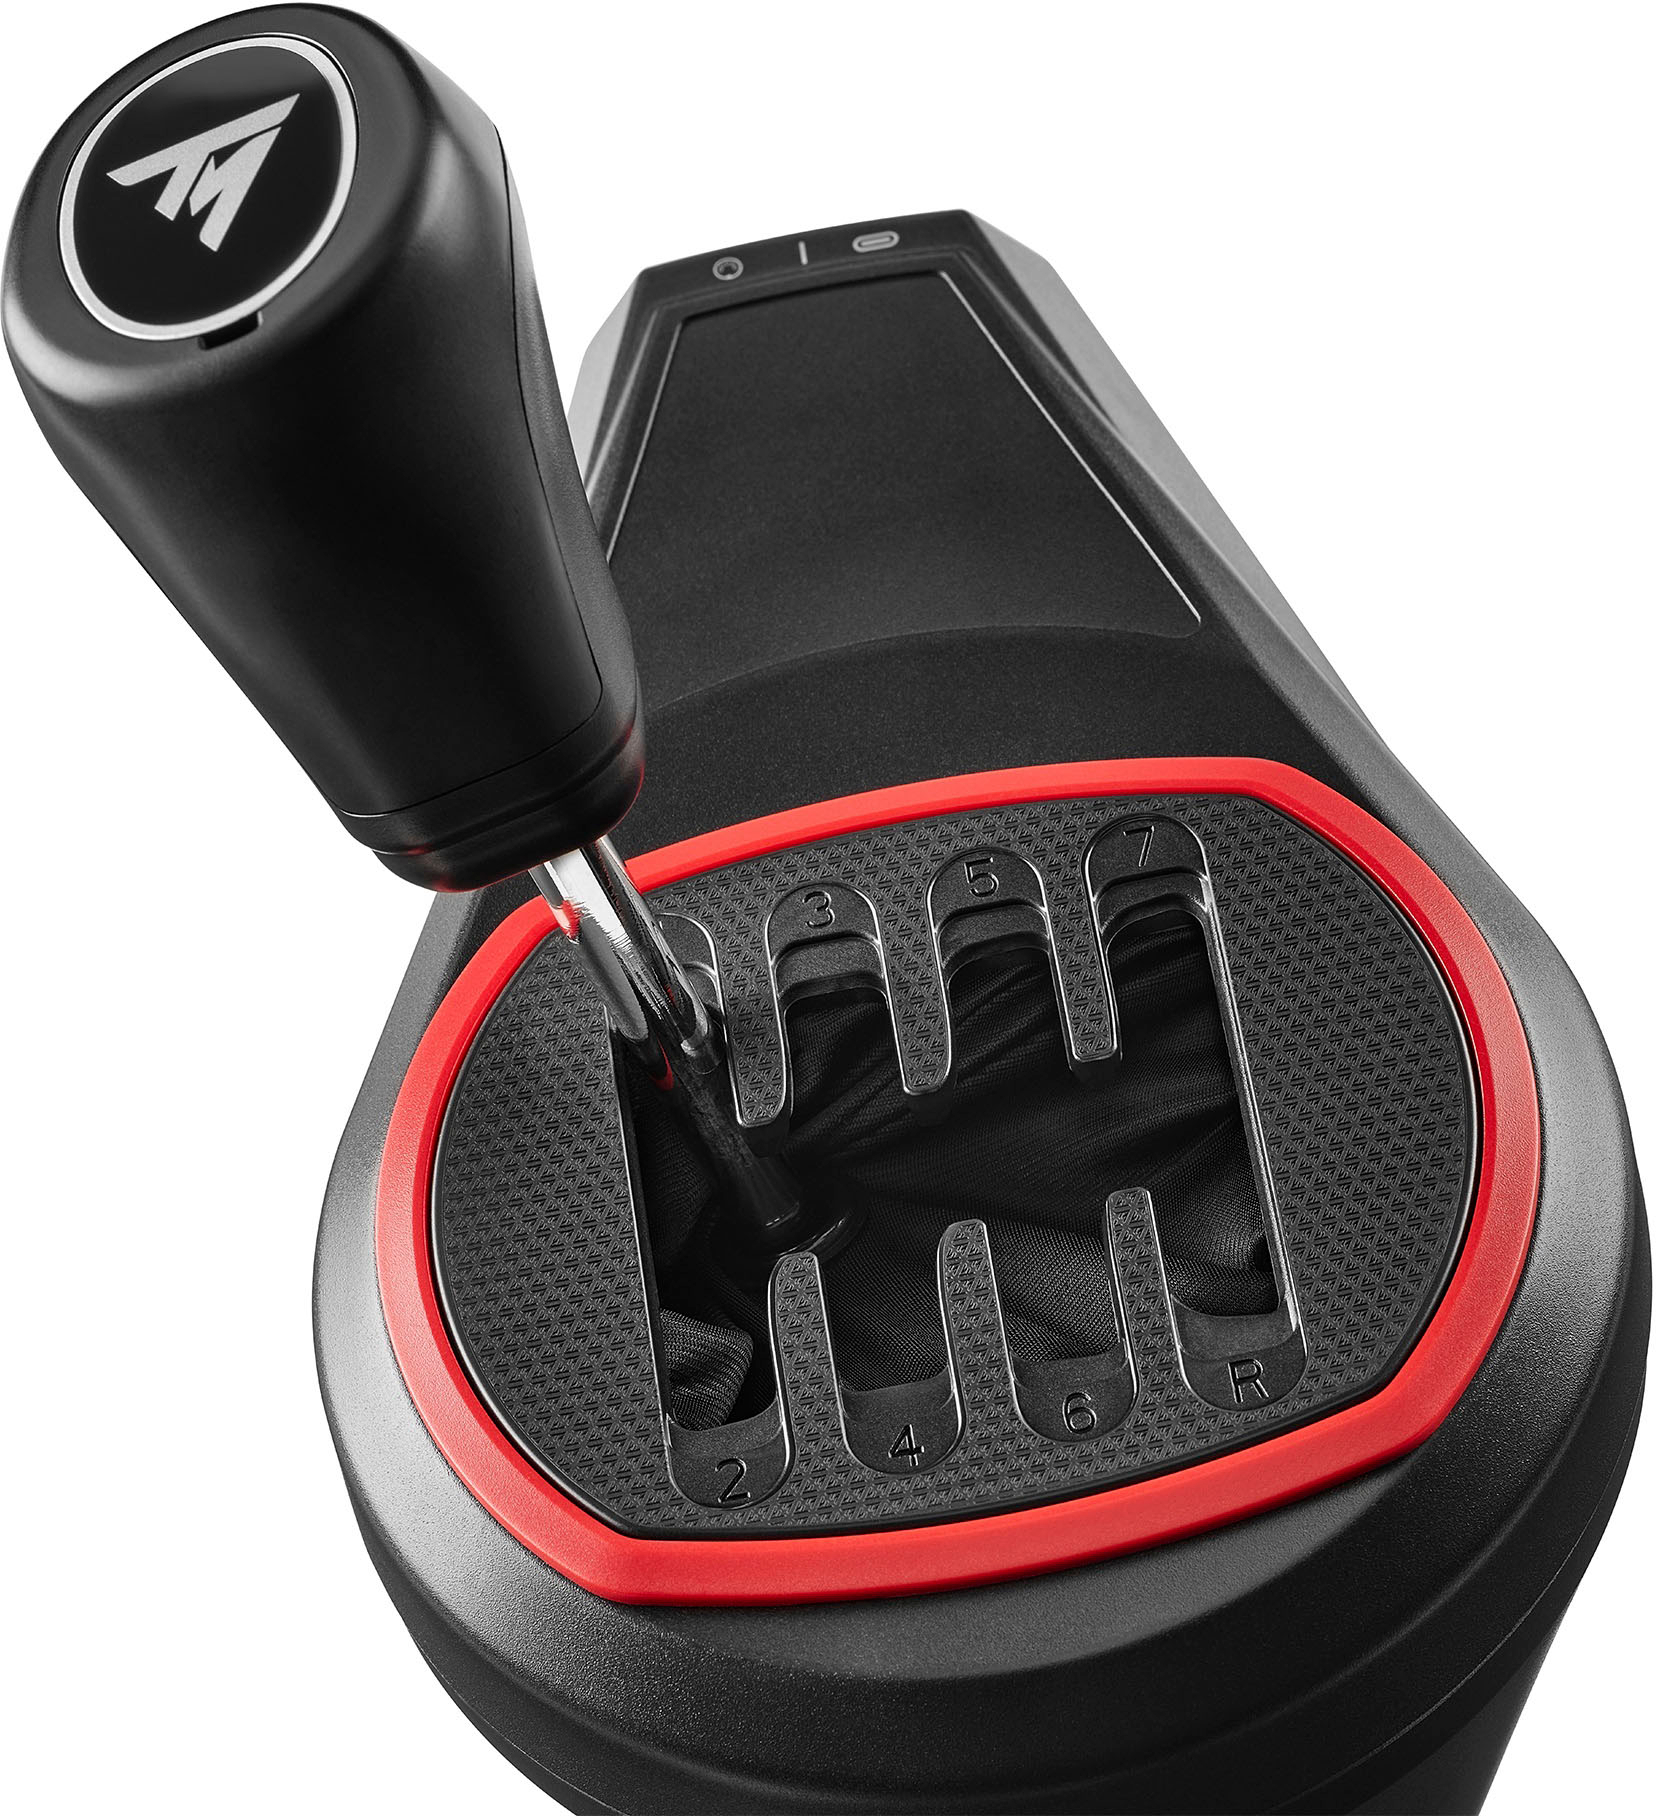 Thrustmaster TH8A Lever - Black/Silver • Prices »